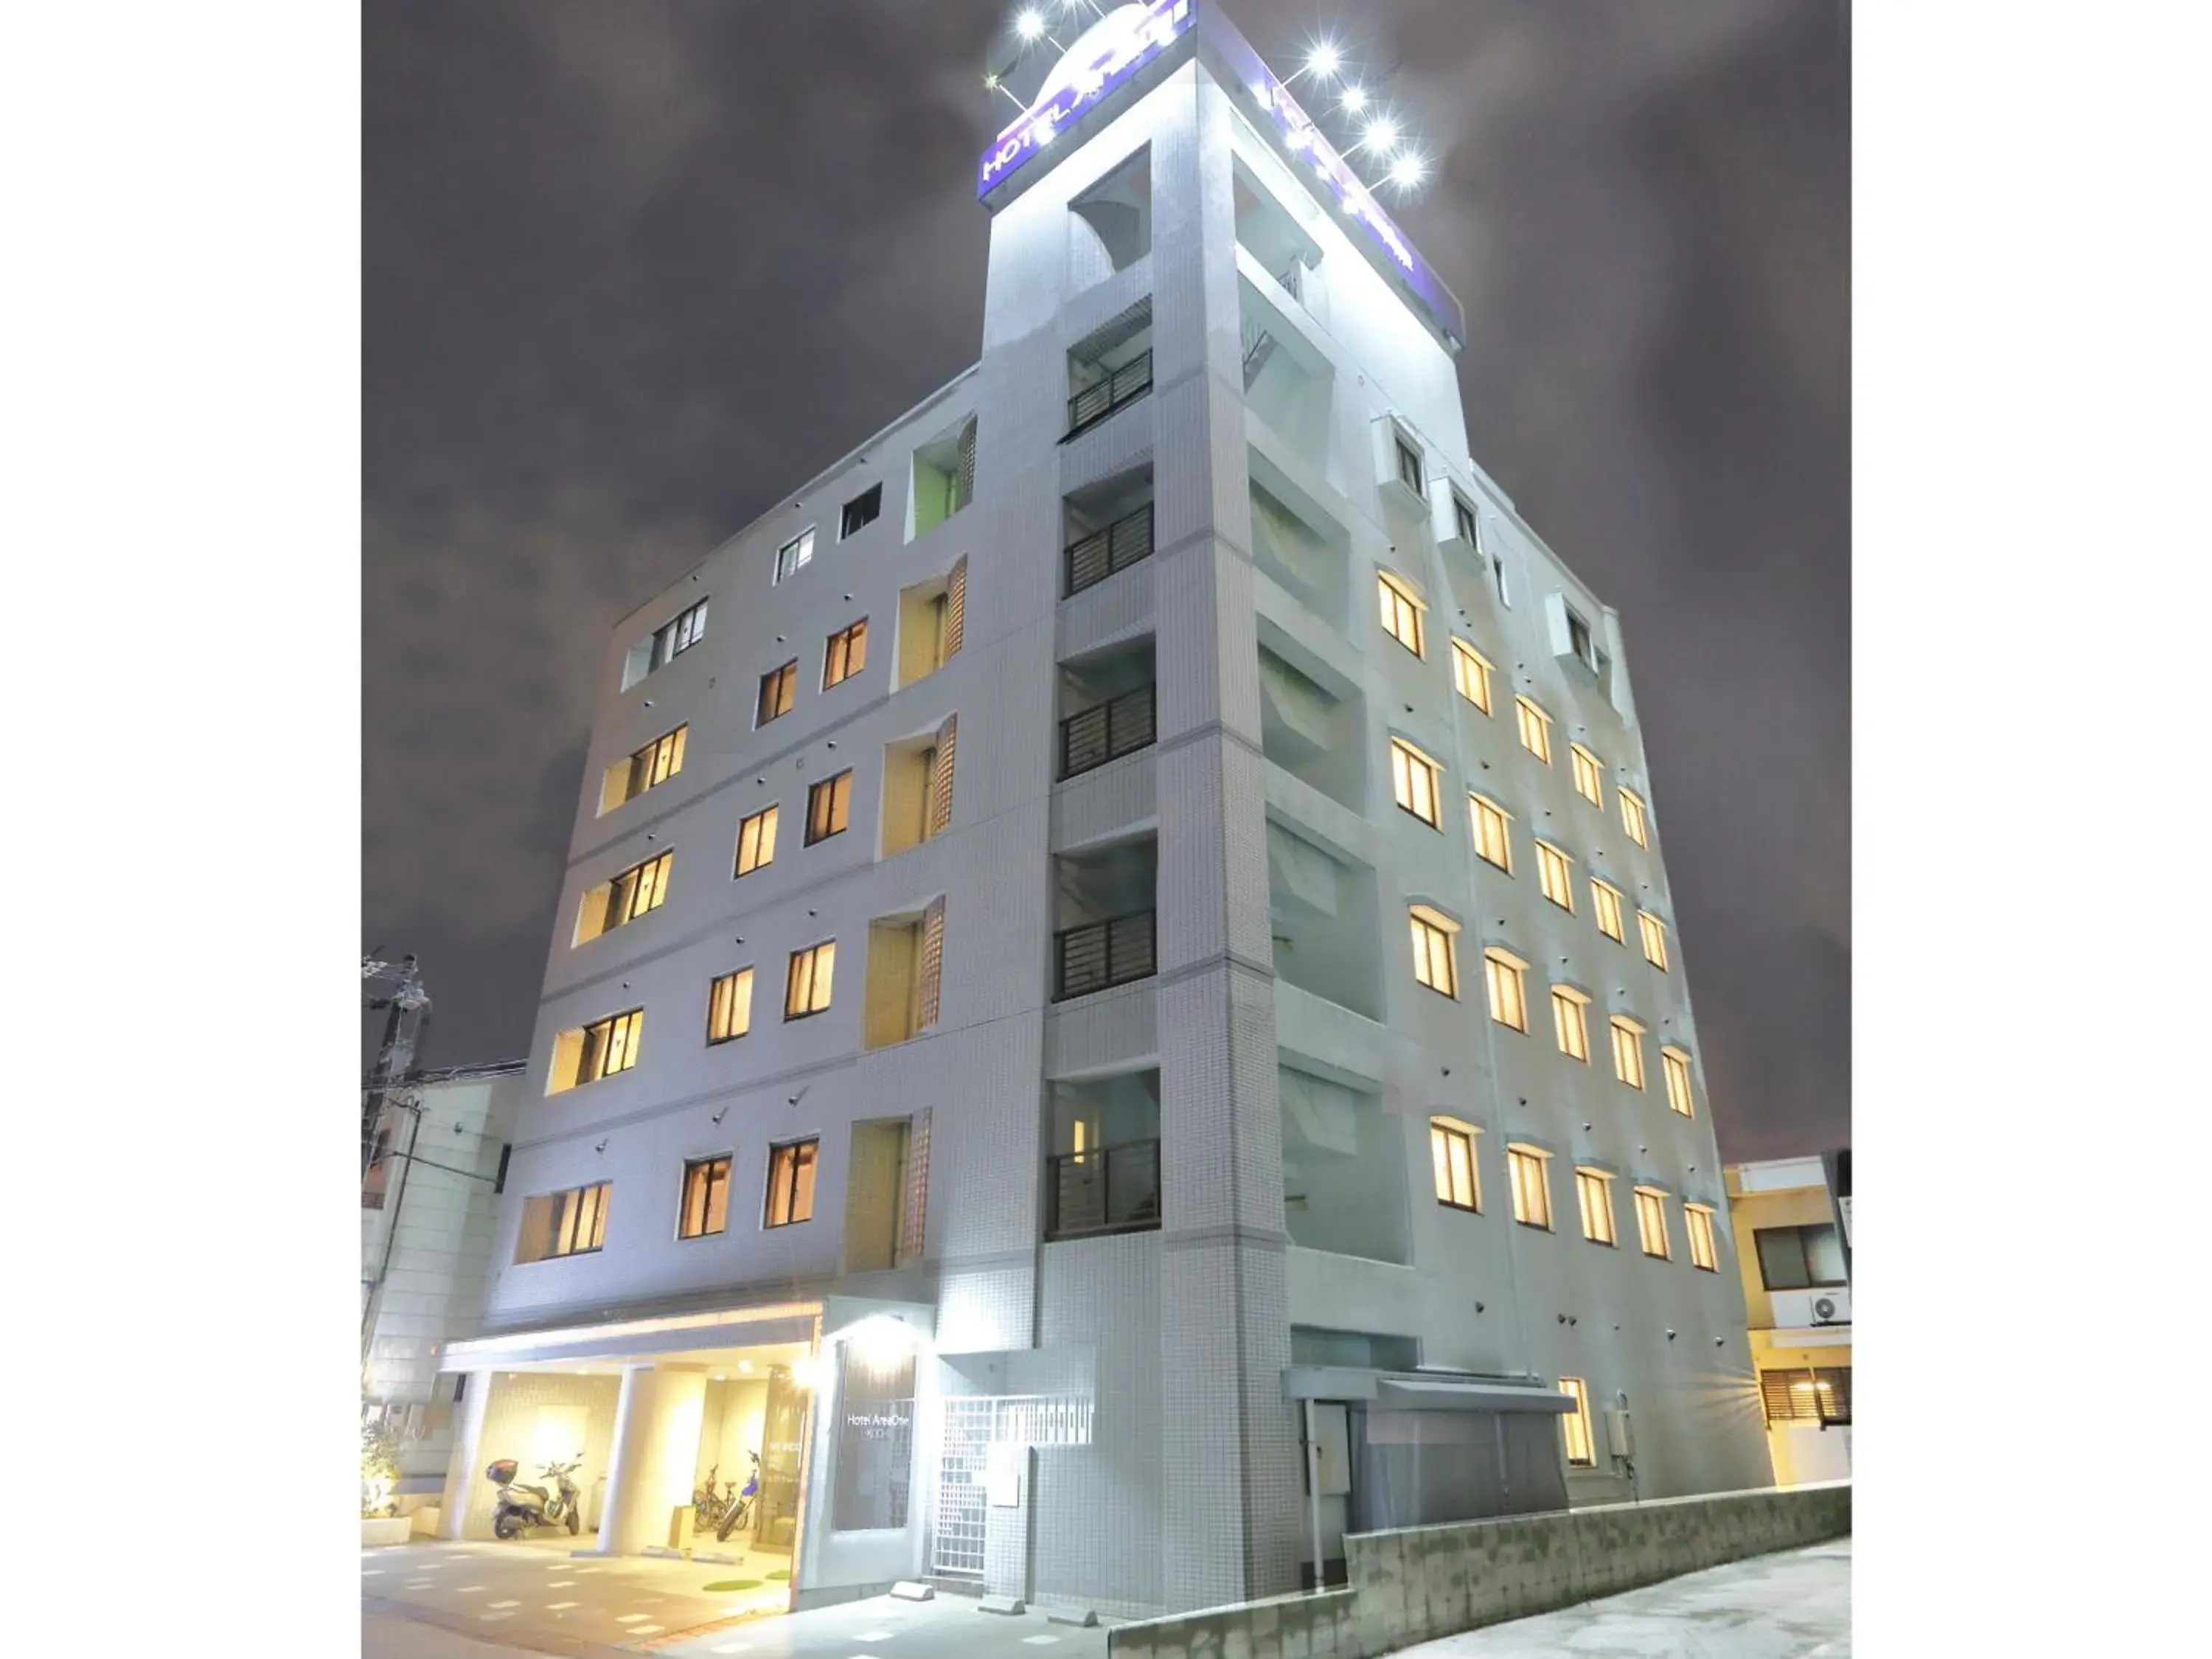 Property Building in Hotel Areaone Kochi